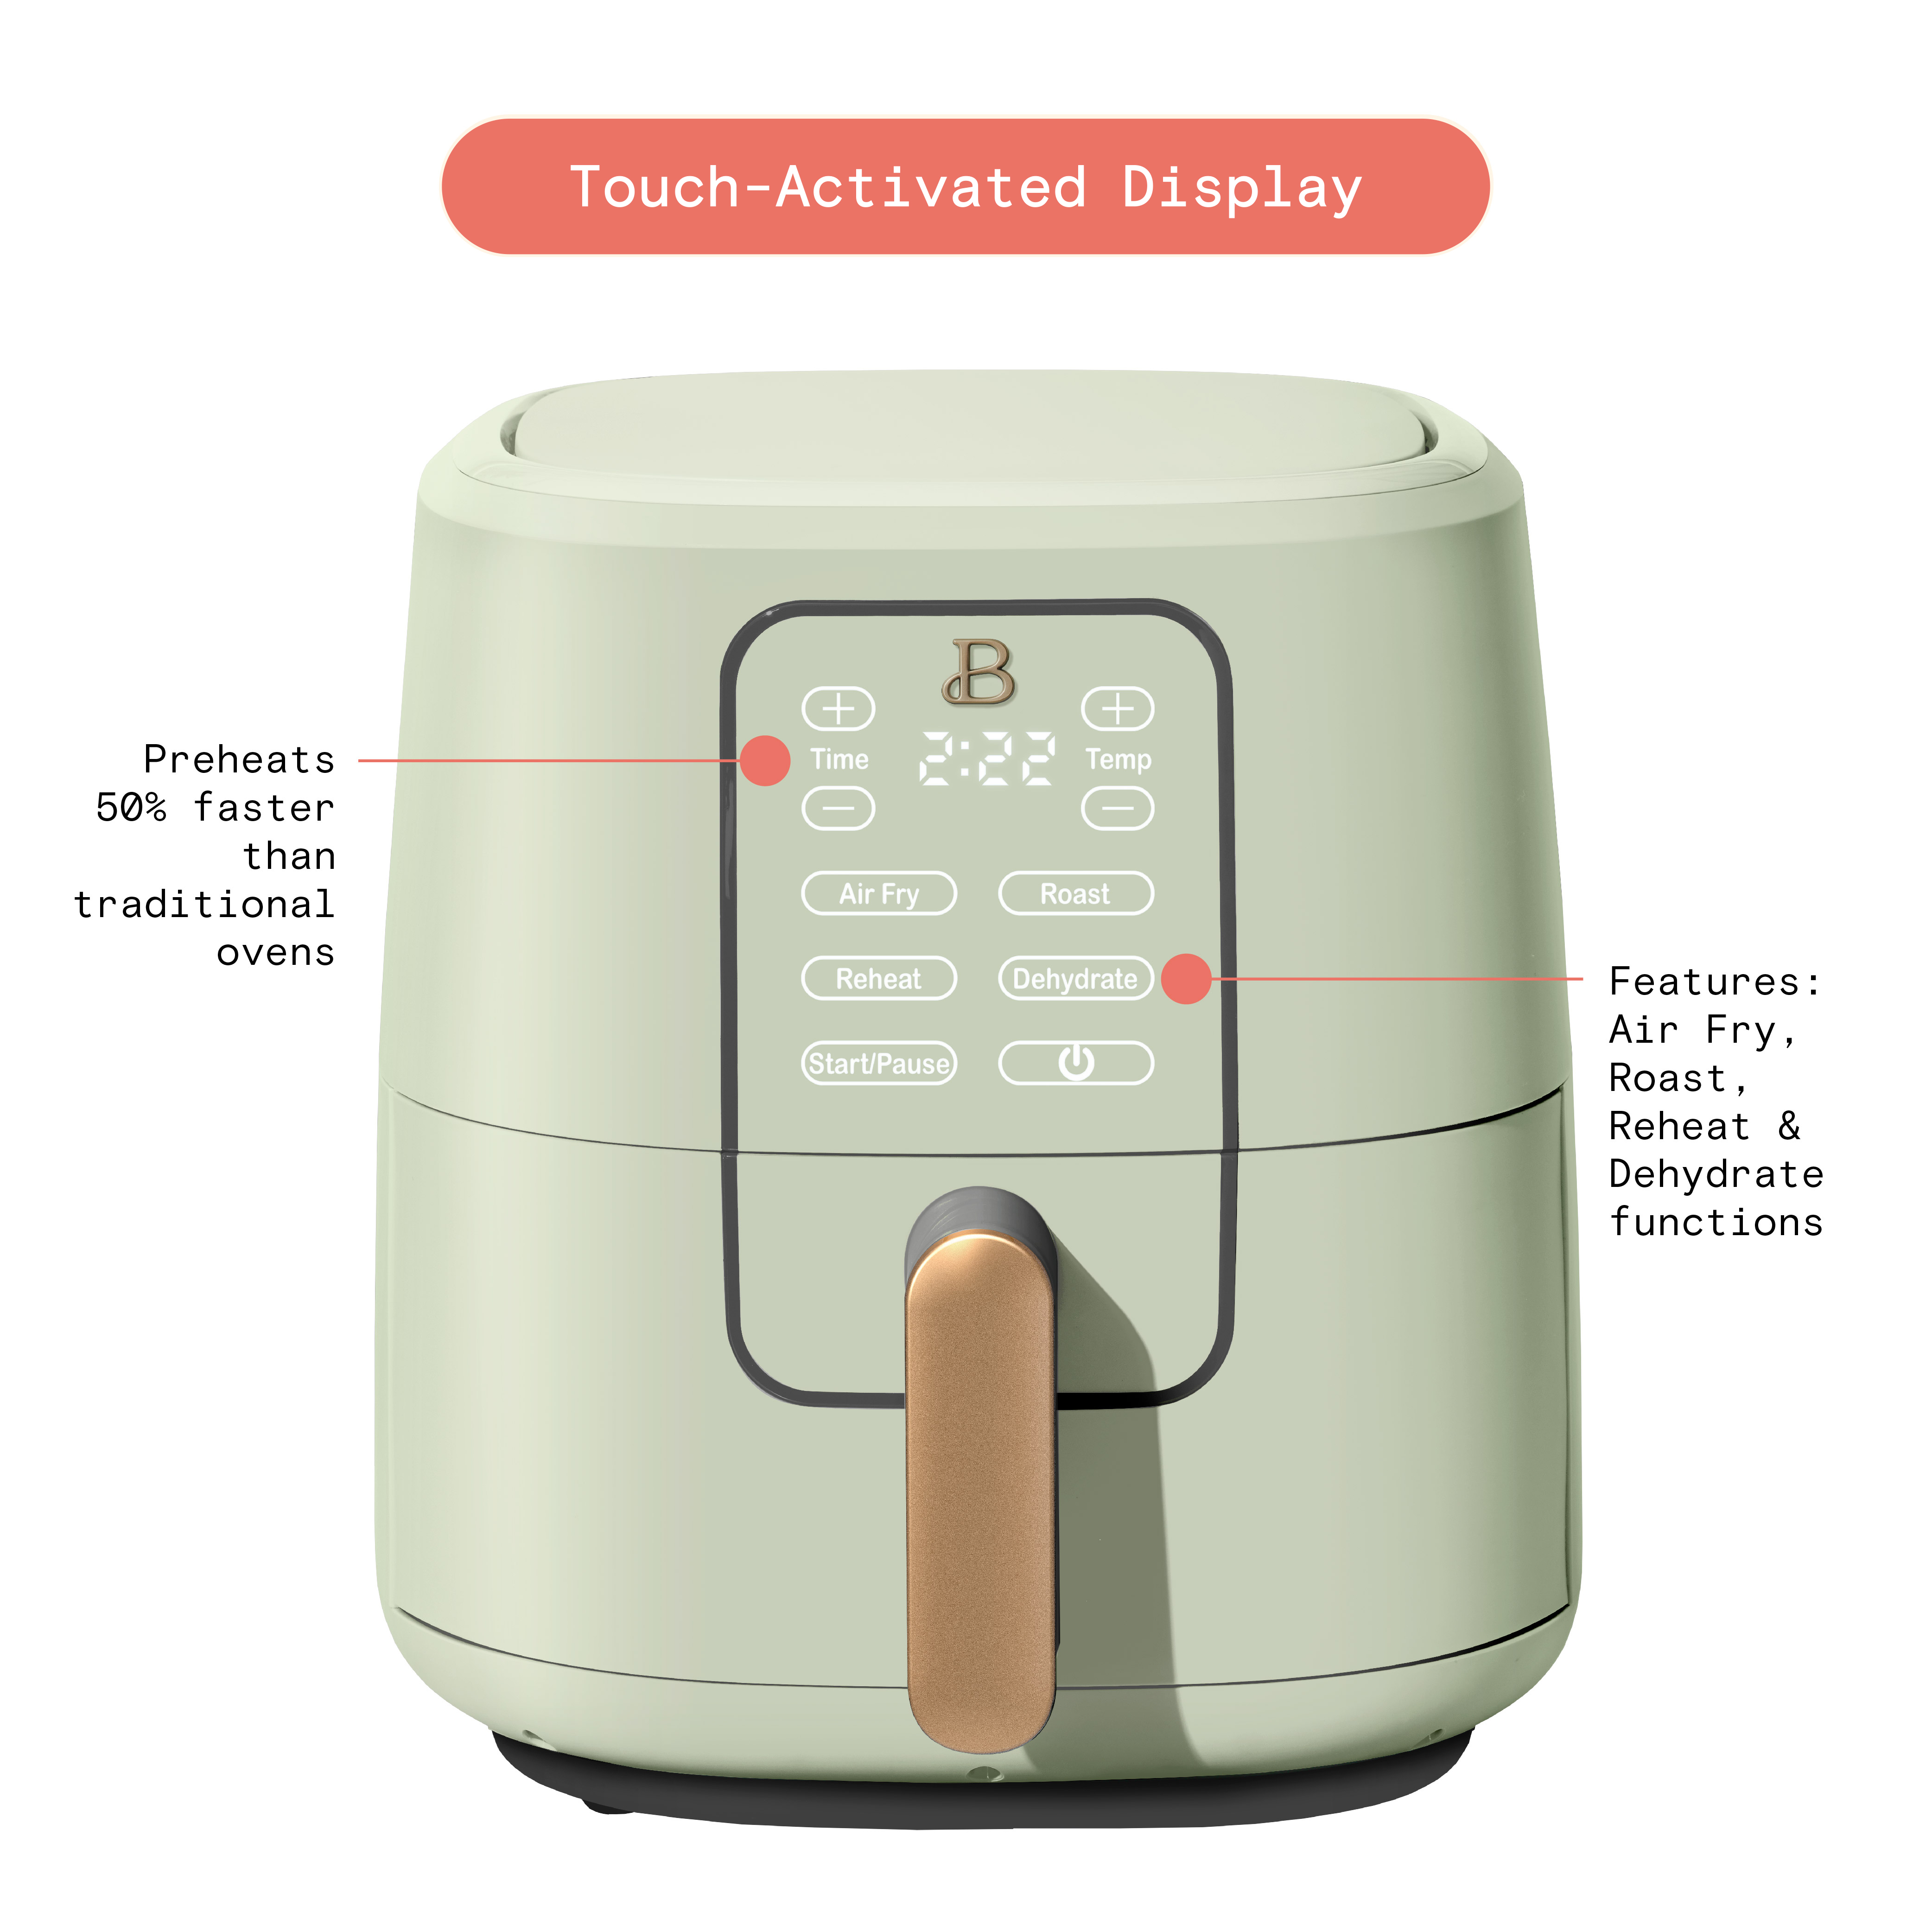 Beautiful 6 Qt Air Fryer with TurboCrisp Technology and Touch-Activated Display, Sage Green by Drew Barrymore - image 5 of 11